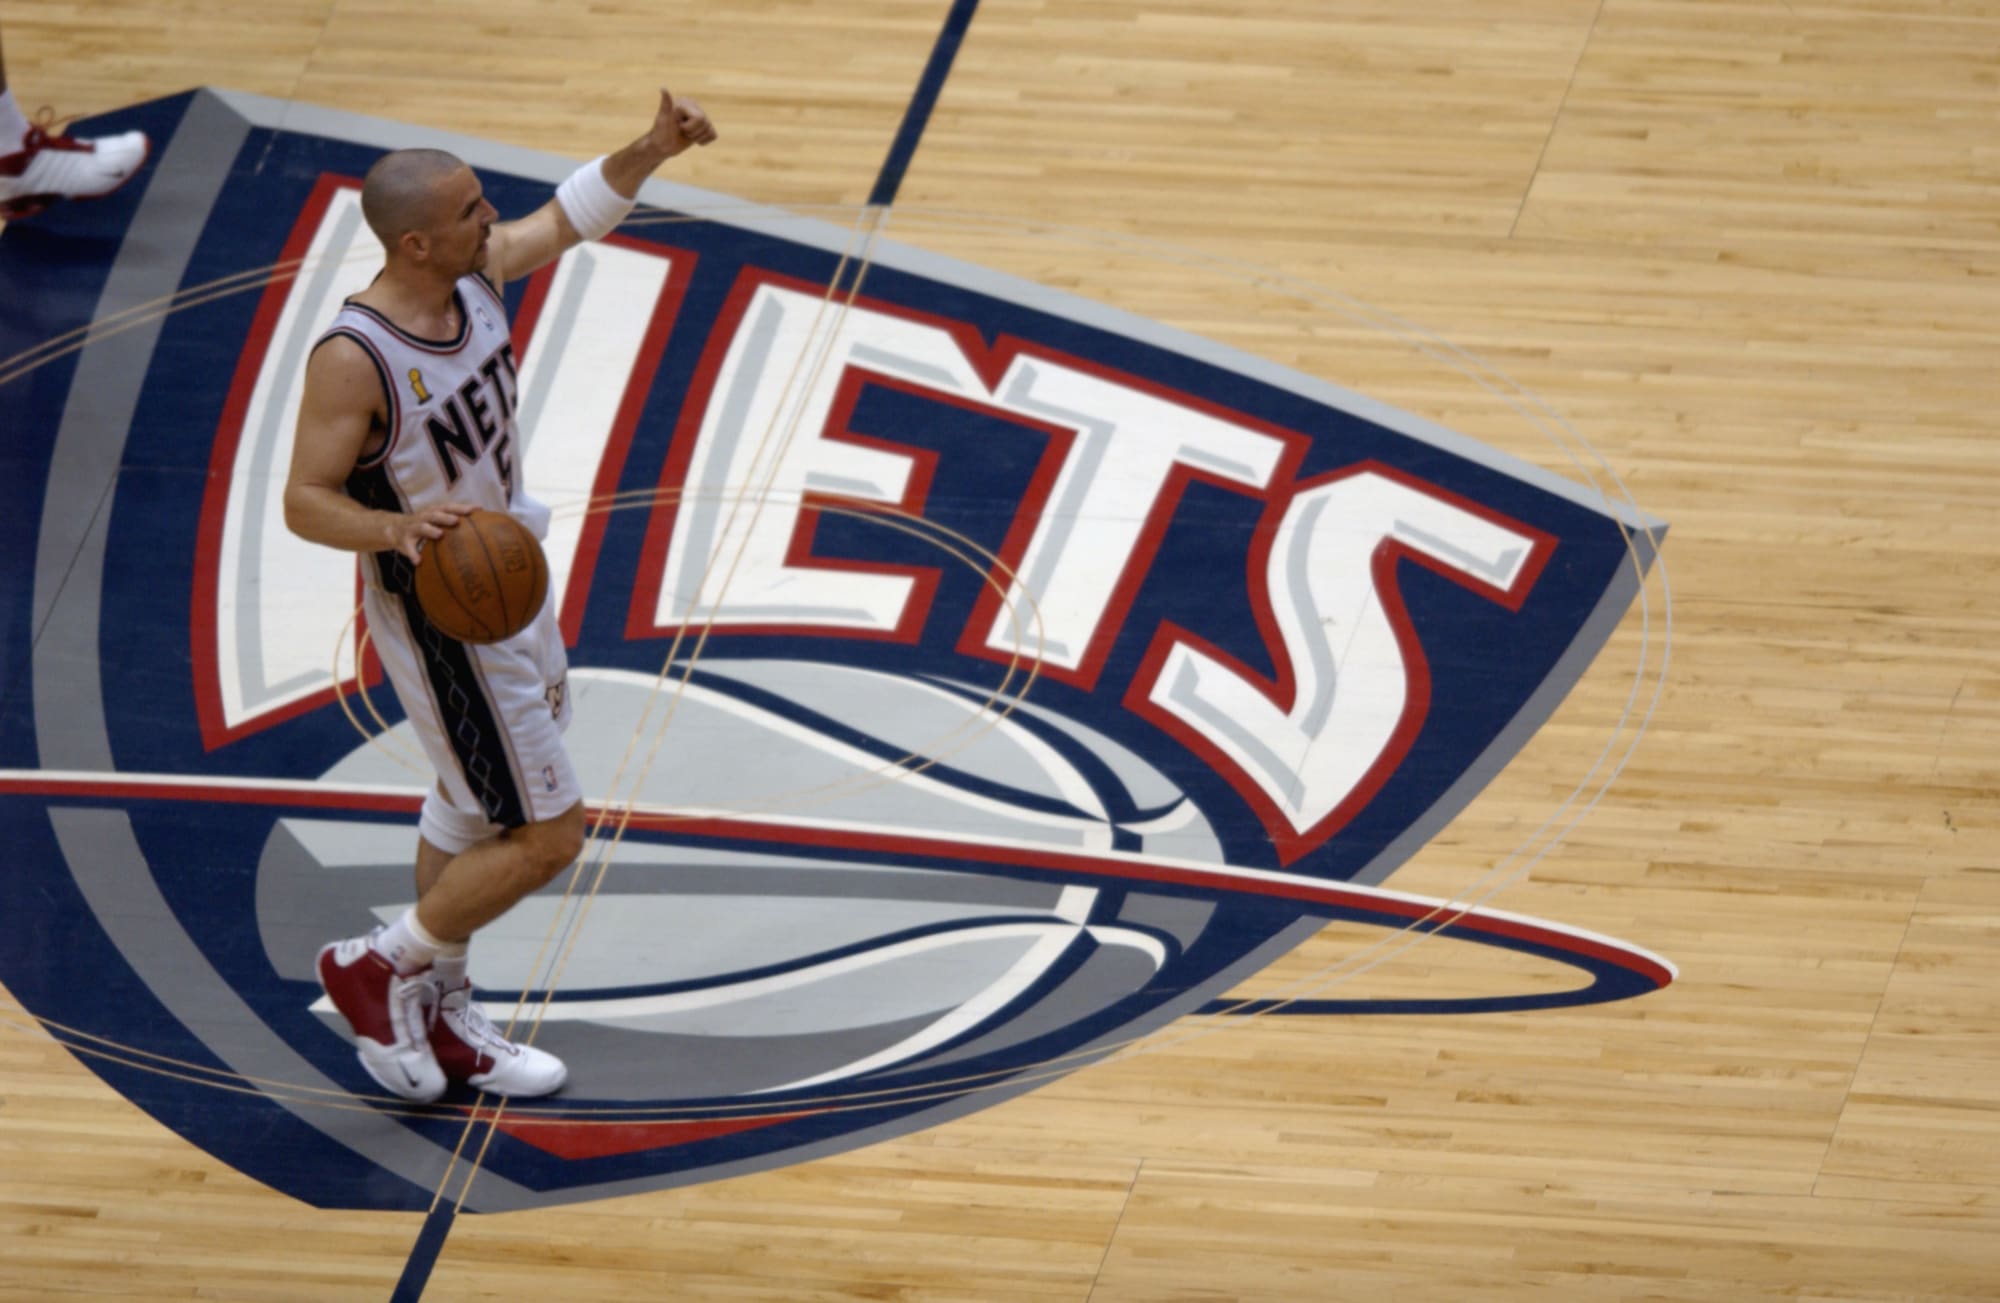 Guard Jason Kidd of the New Jersey Nets points down court during